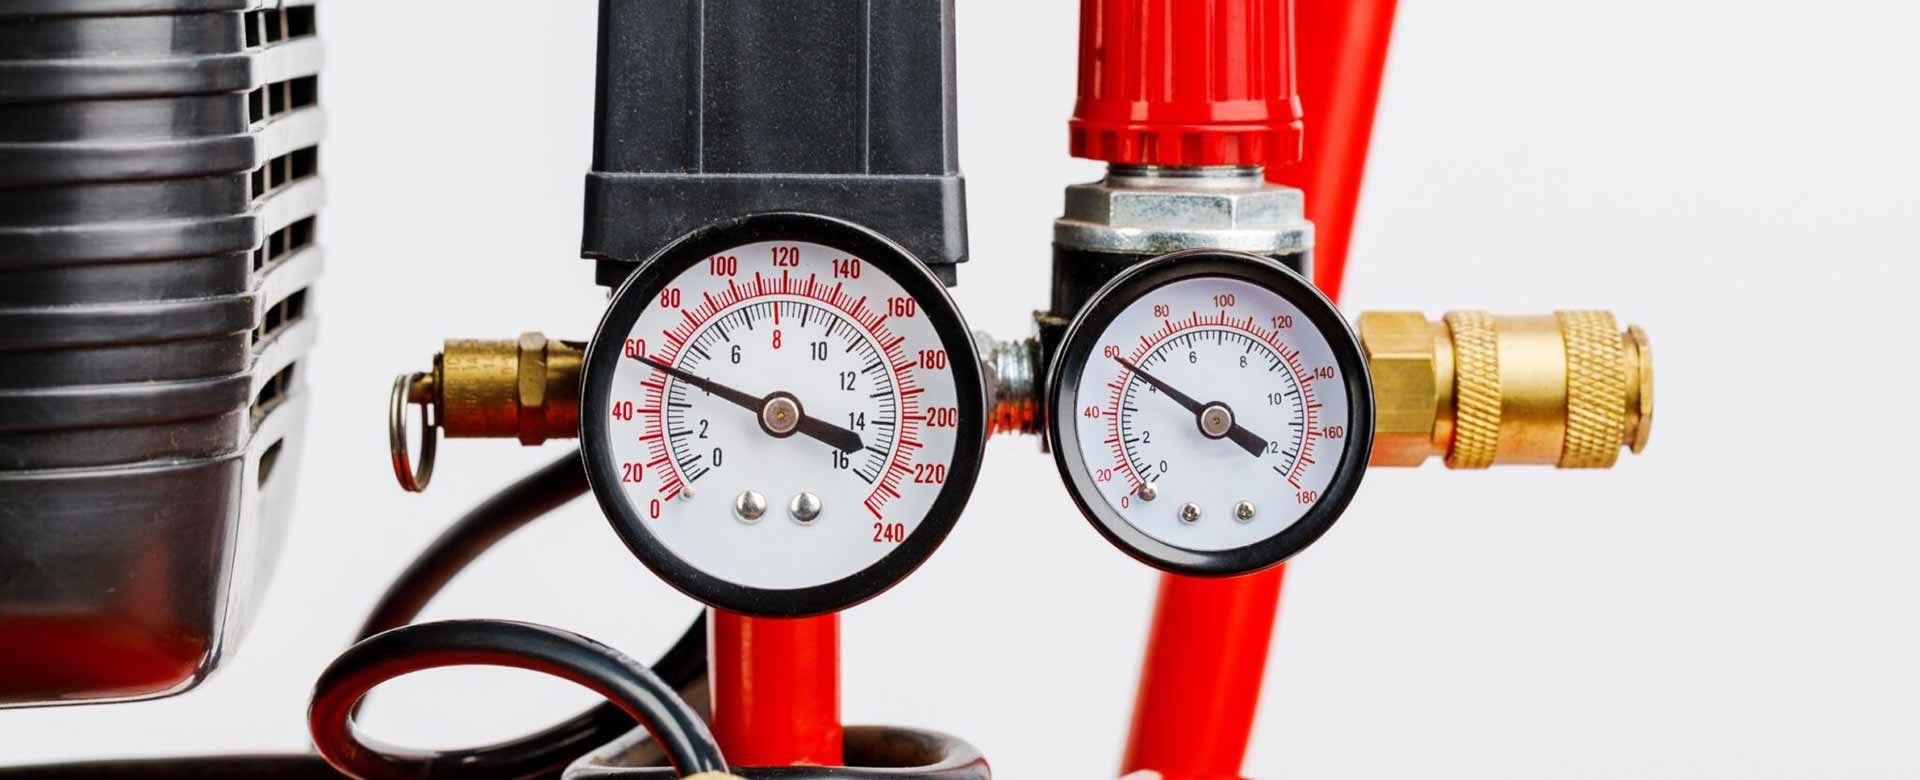 What to do when your air compressor won’t build pressure